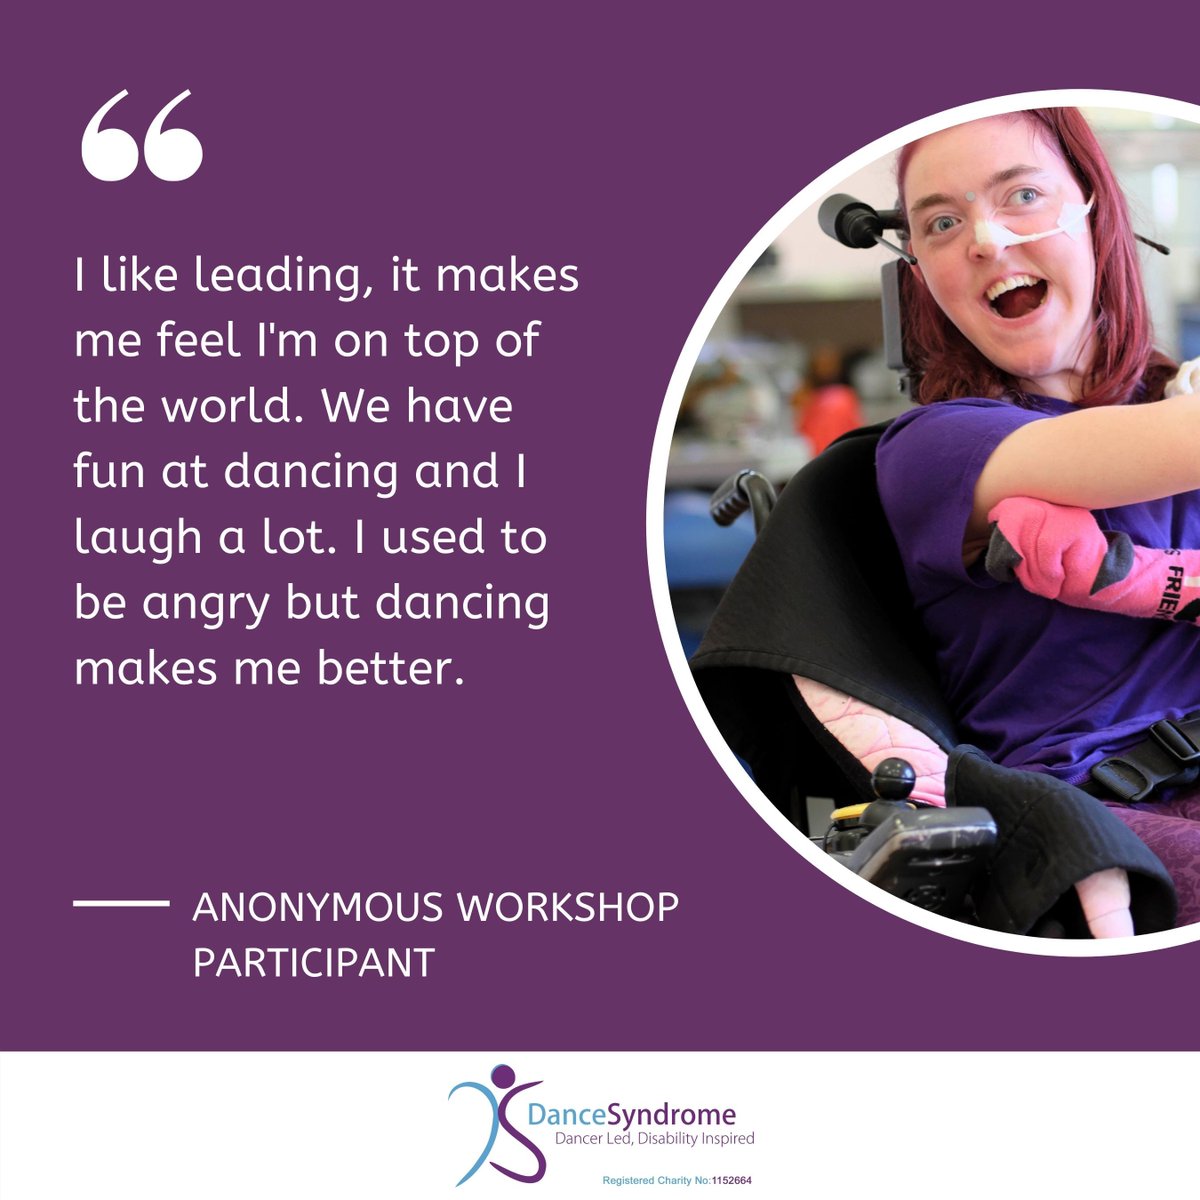 Studies show that 1/4 people will experience #mentalhealth challenges but that increases to as many as 1/2 people with a #LearningDisability #MomentsForMovement like dancing are great for improving wellbeing 💜💙 Find out more dancesyndrome.co.uk #MentalHealthAwarenessWeek